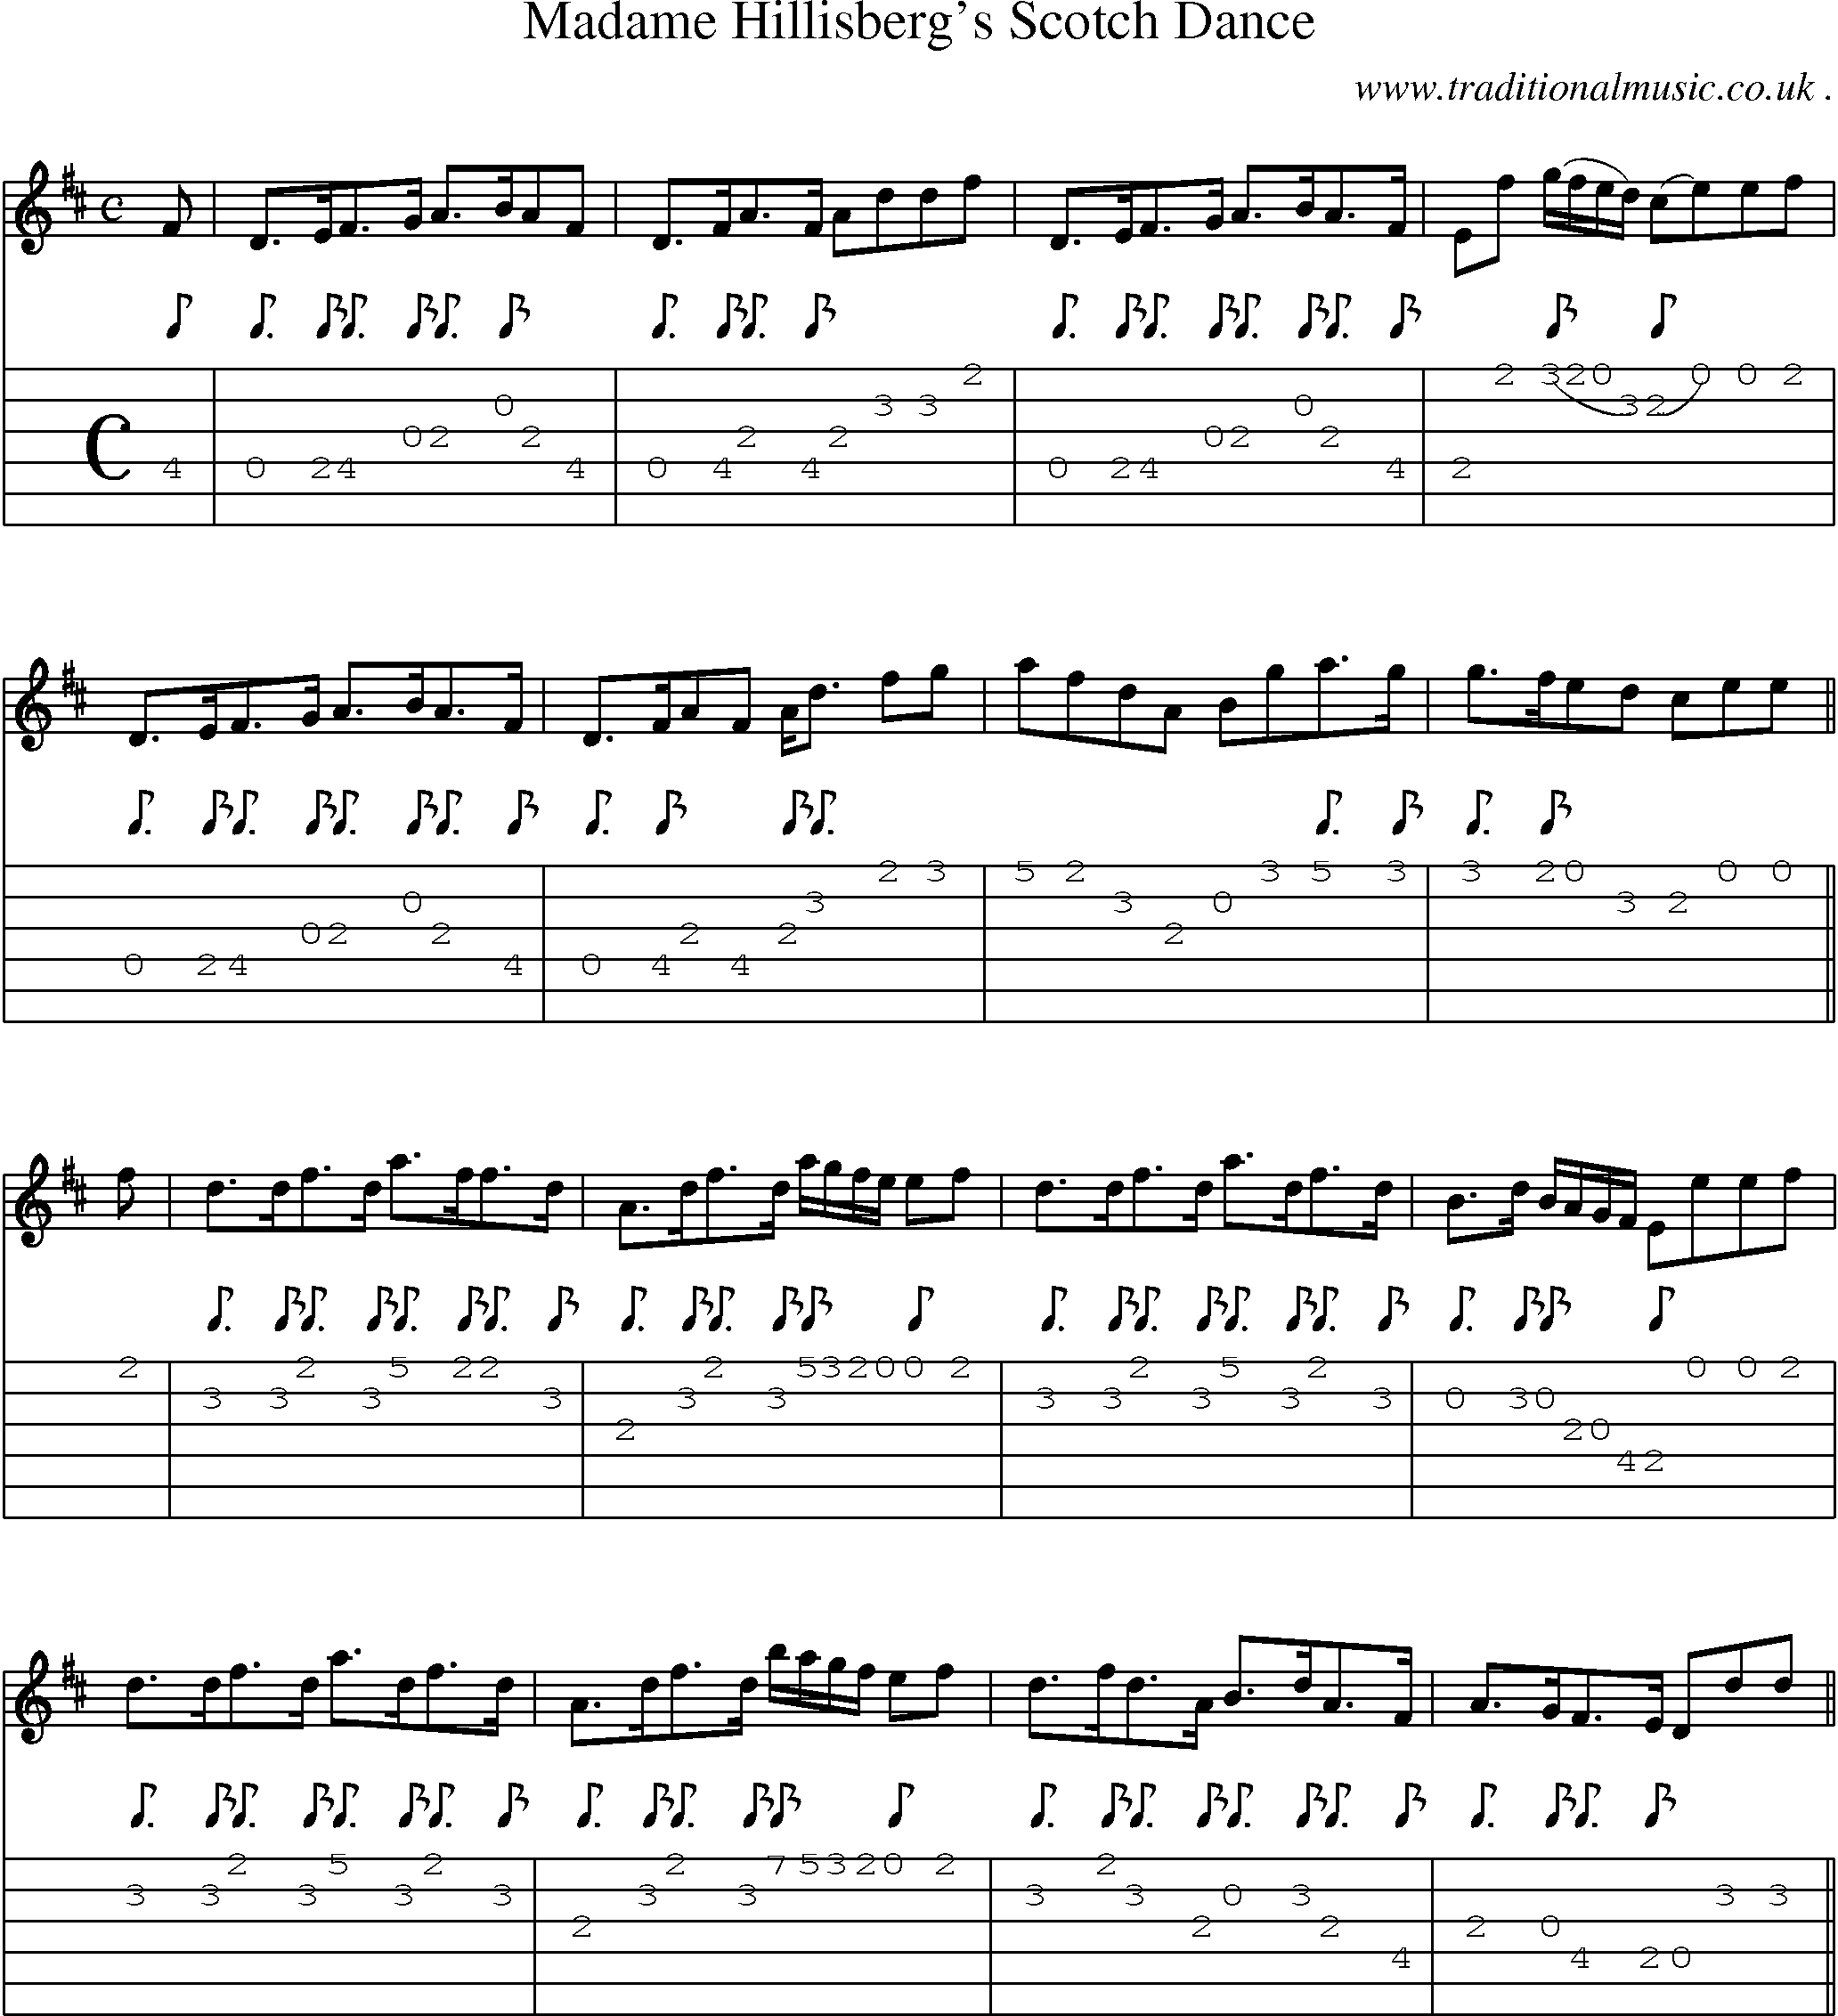 Sheet-Music and Guitar Tabs for Madame Hillisbergs Scotch Dance